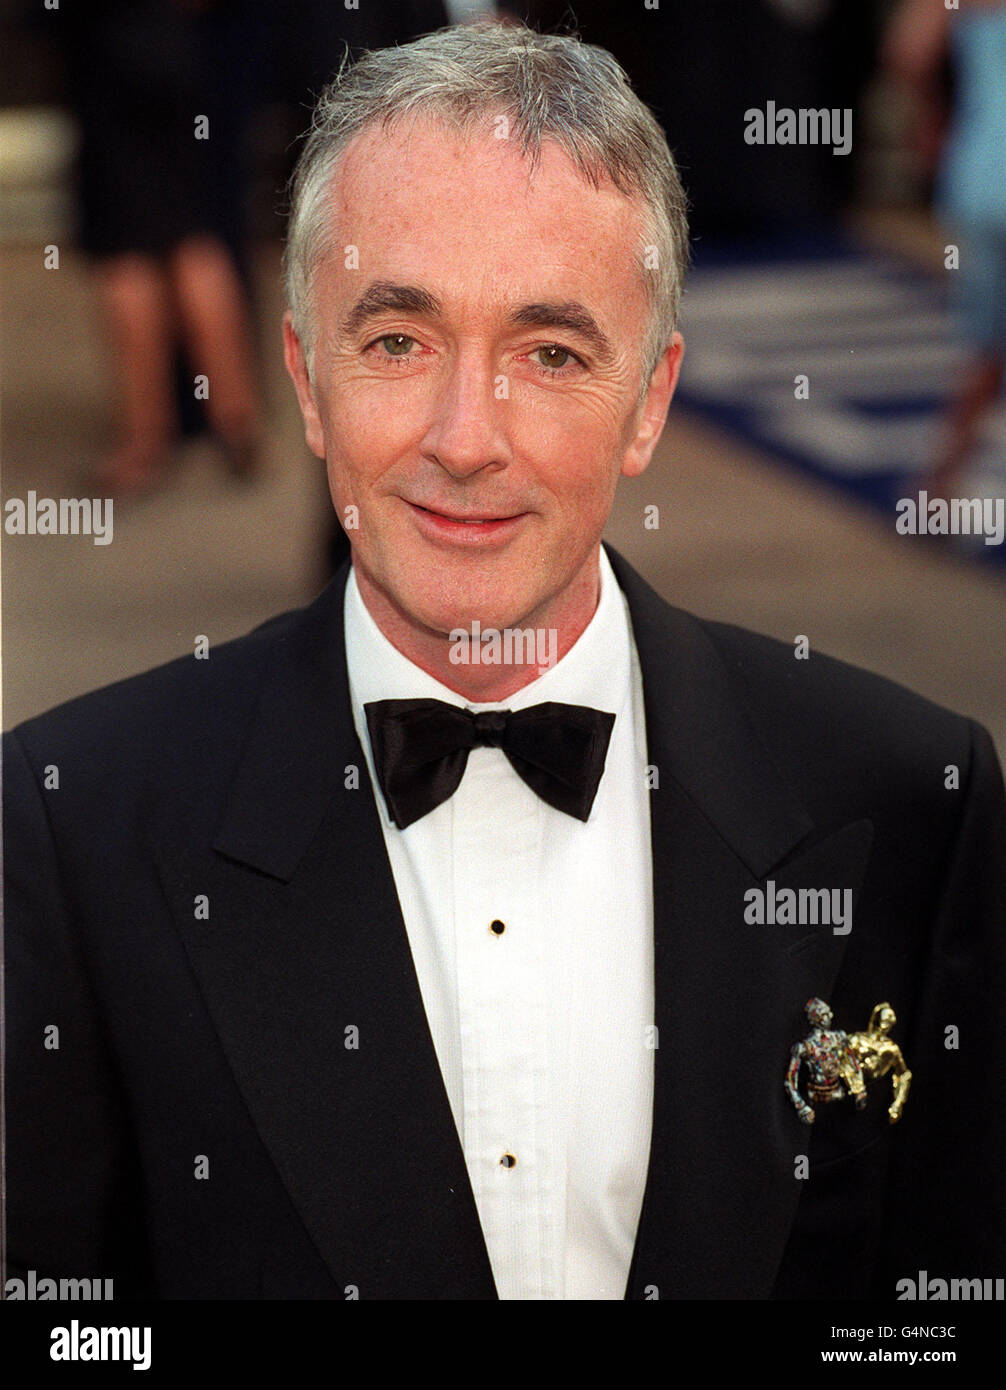 Actor Anthony Daniels, who plays C3PO, arrives for the Royal Premiere of Star Wars: Episode 1, The Phantom Menace at Leicester Square, London. Stock Photo